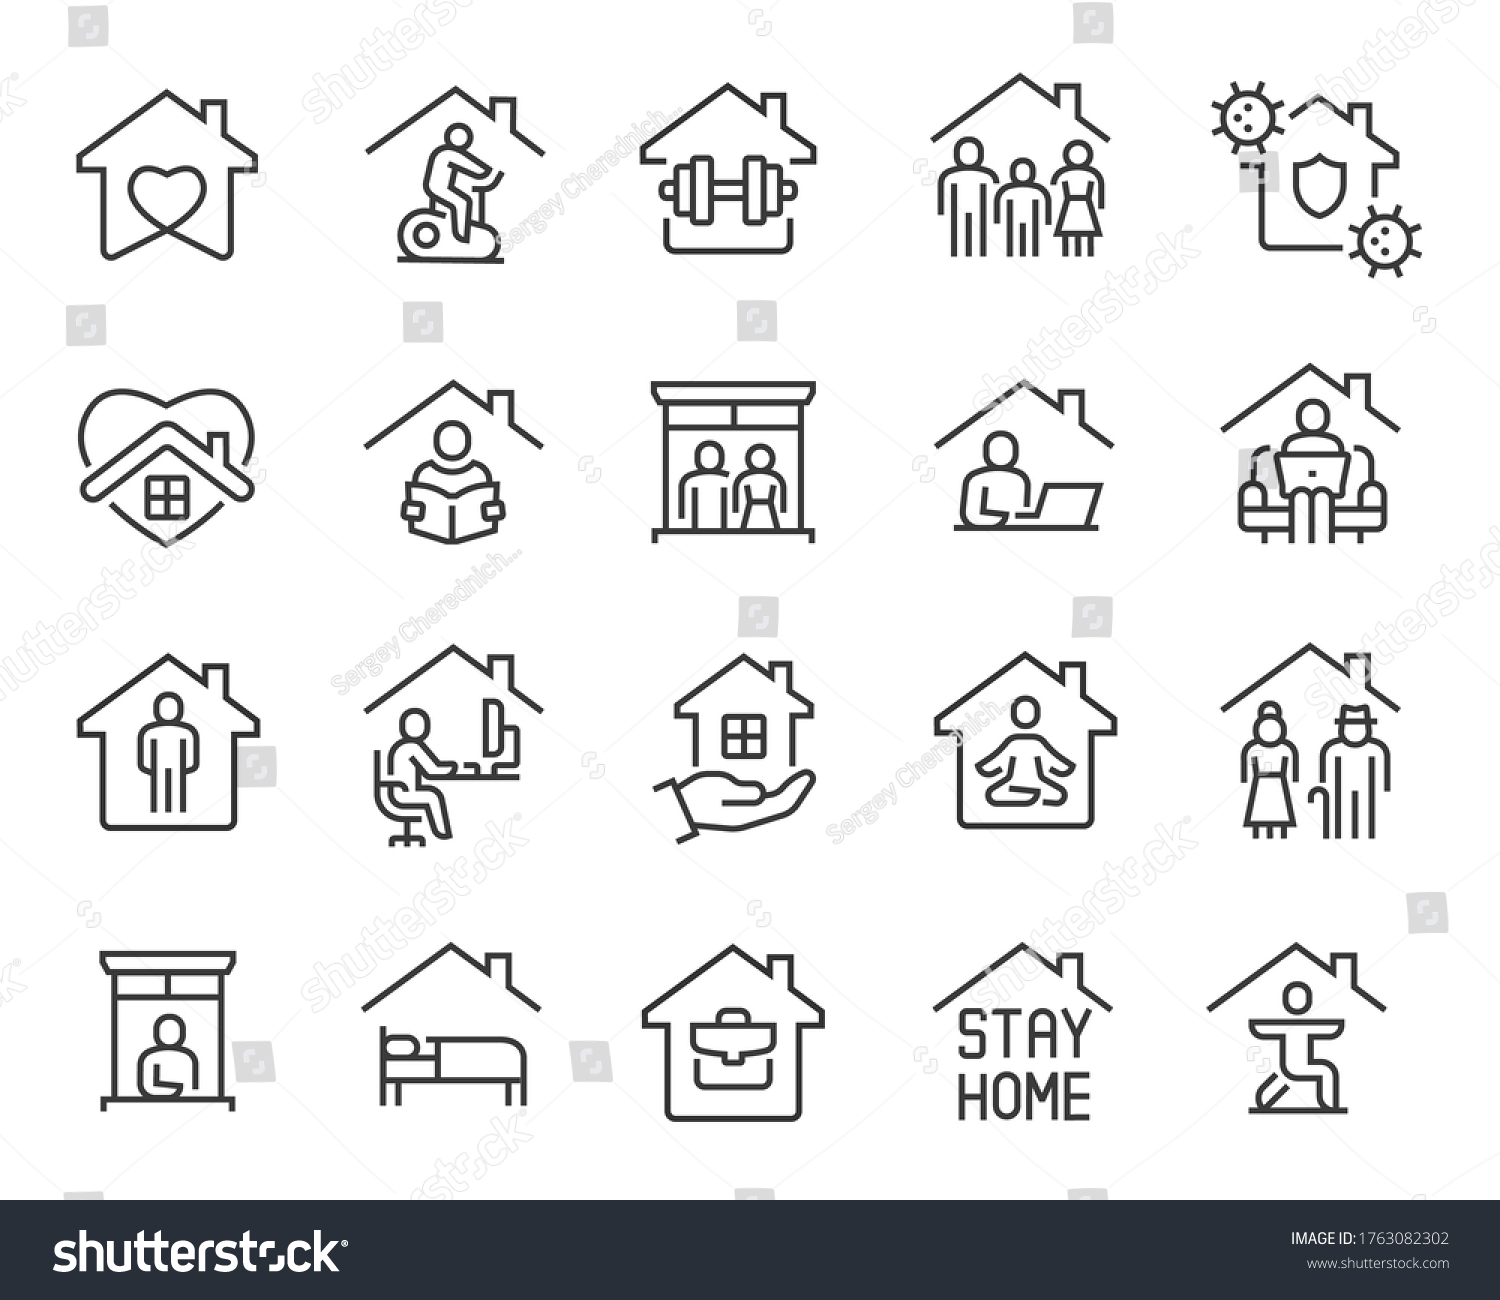 SVG of Stay Home Icons set. Collection of linear simple web icons such as Work from Home, Stay Home, Virus Protection, Isolation, Sports and Hobbies, Covid-19, CORONAVIRUS, Family at Home, Quarantine and svg